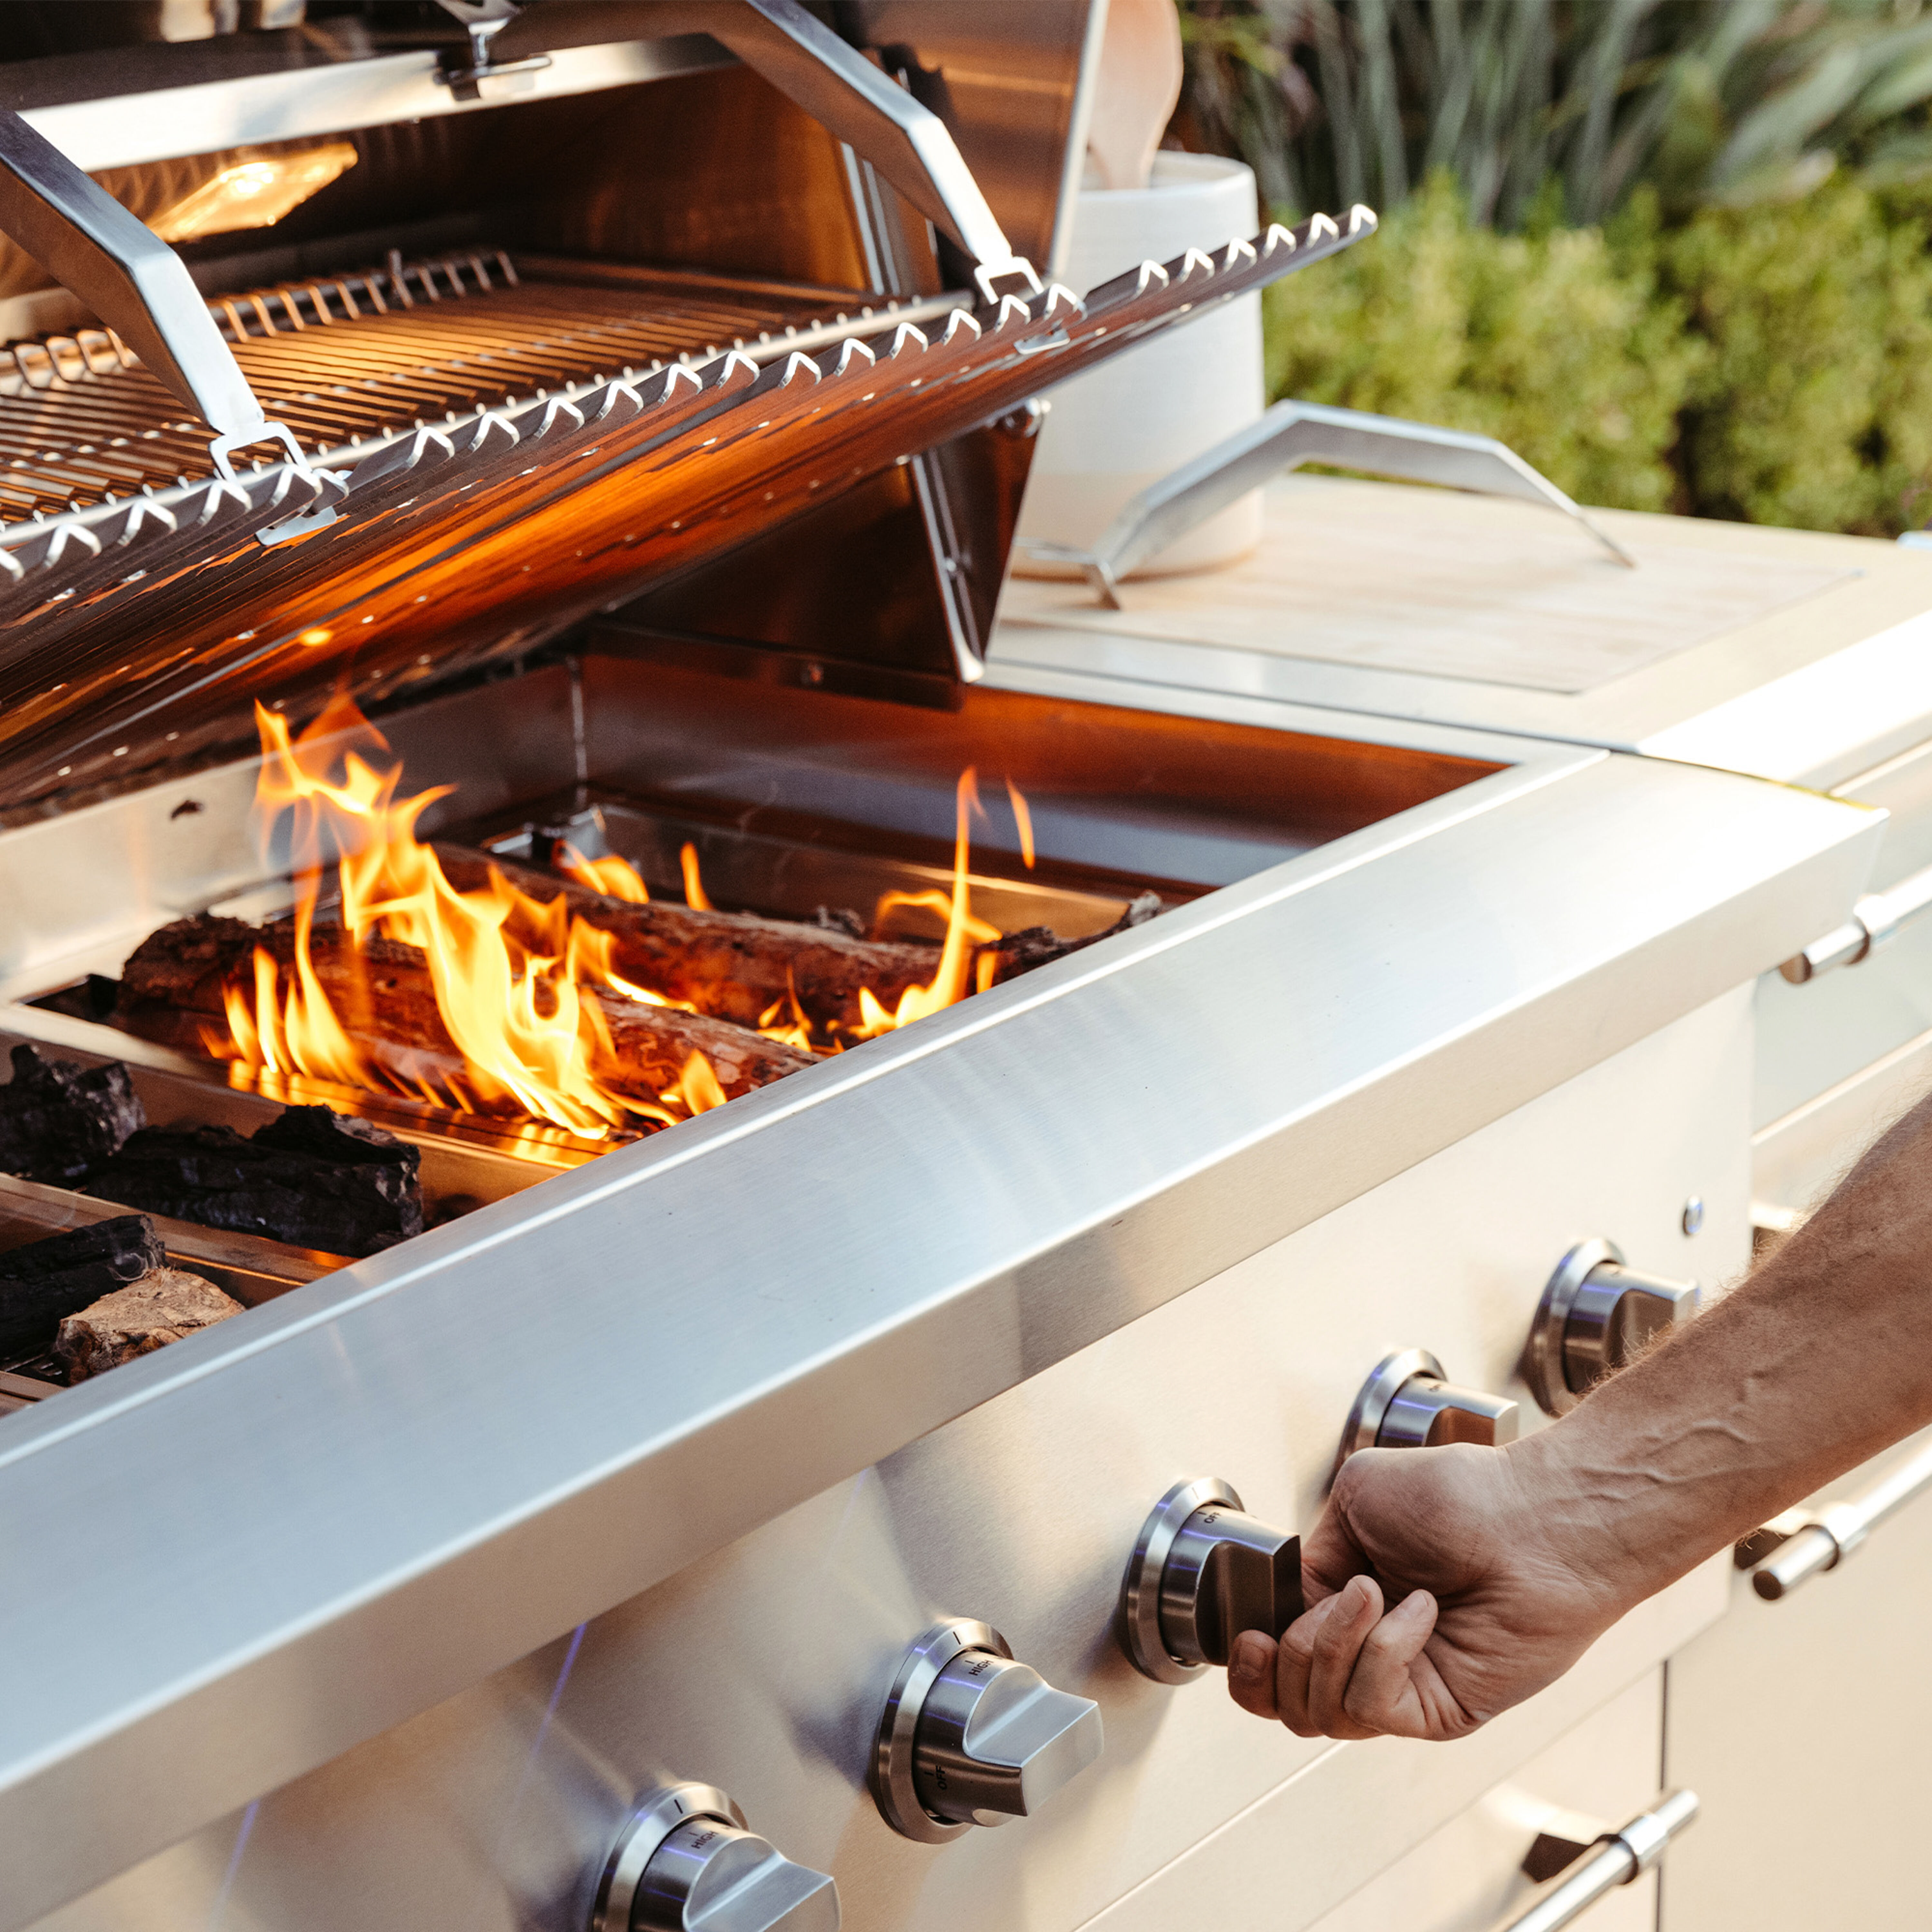 Pre-heat your gas or charcoal grill for a few minutes before you start grilling to remove any leftover debris or food scraps. 